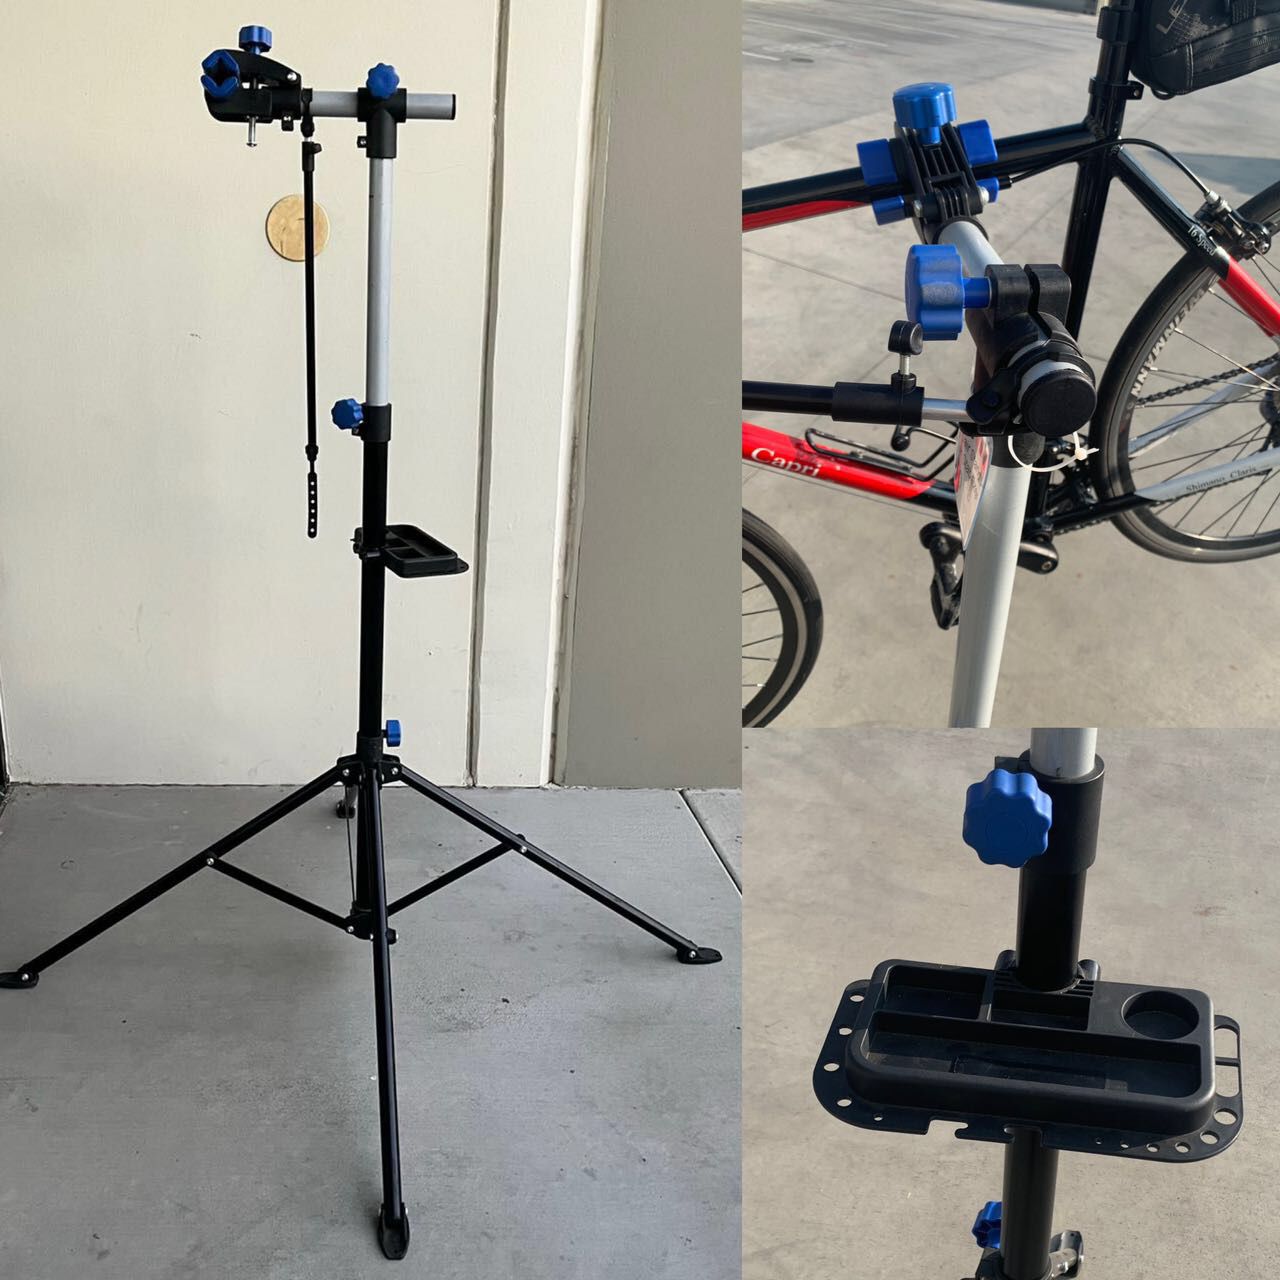 New In Box Bicycle Bike Ship Maintenance Stand Adjustable Retractable Rack For Road Mountain Fixie Bikes With Tool Tray 